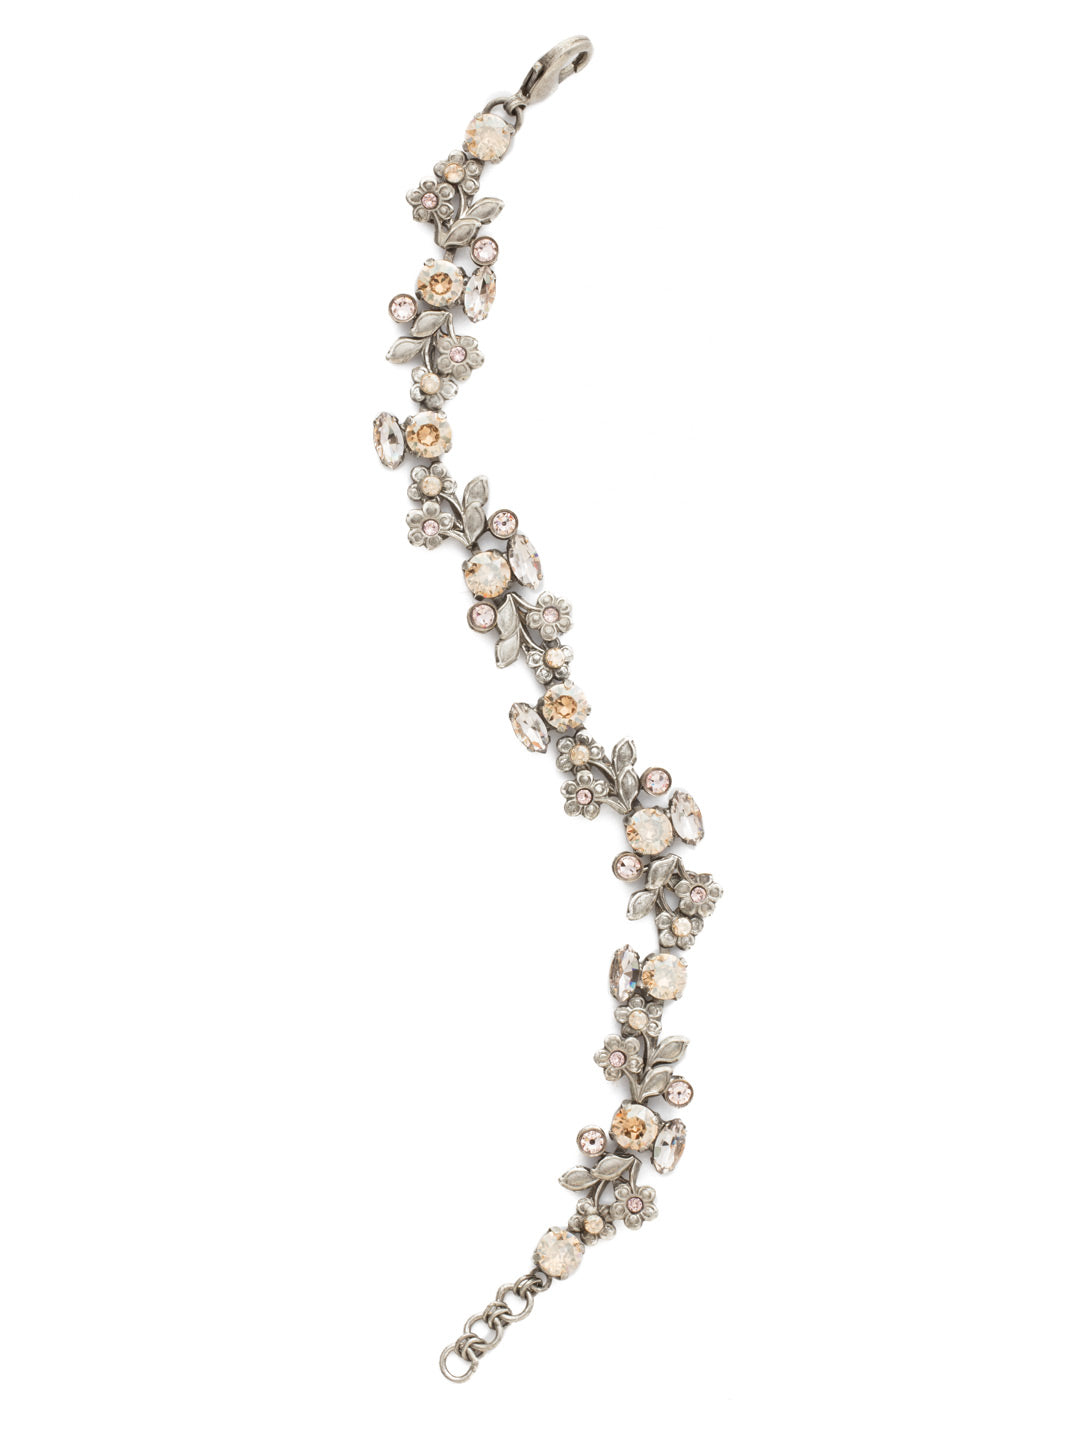 Linden Bracelet - BDT19ASSBL - <p>Feminine, floral metalwork is accented with a mixture of round and navette crystals. From Sorrelli's Satin Blush collection in our Antique Silver-tone finish.</p>